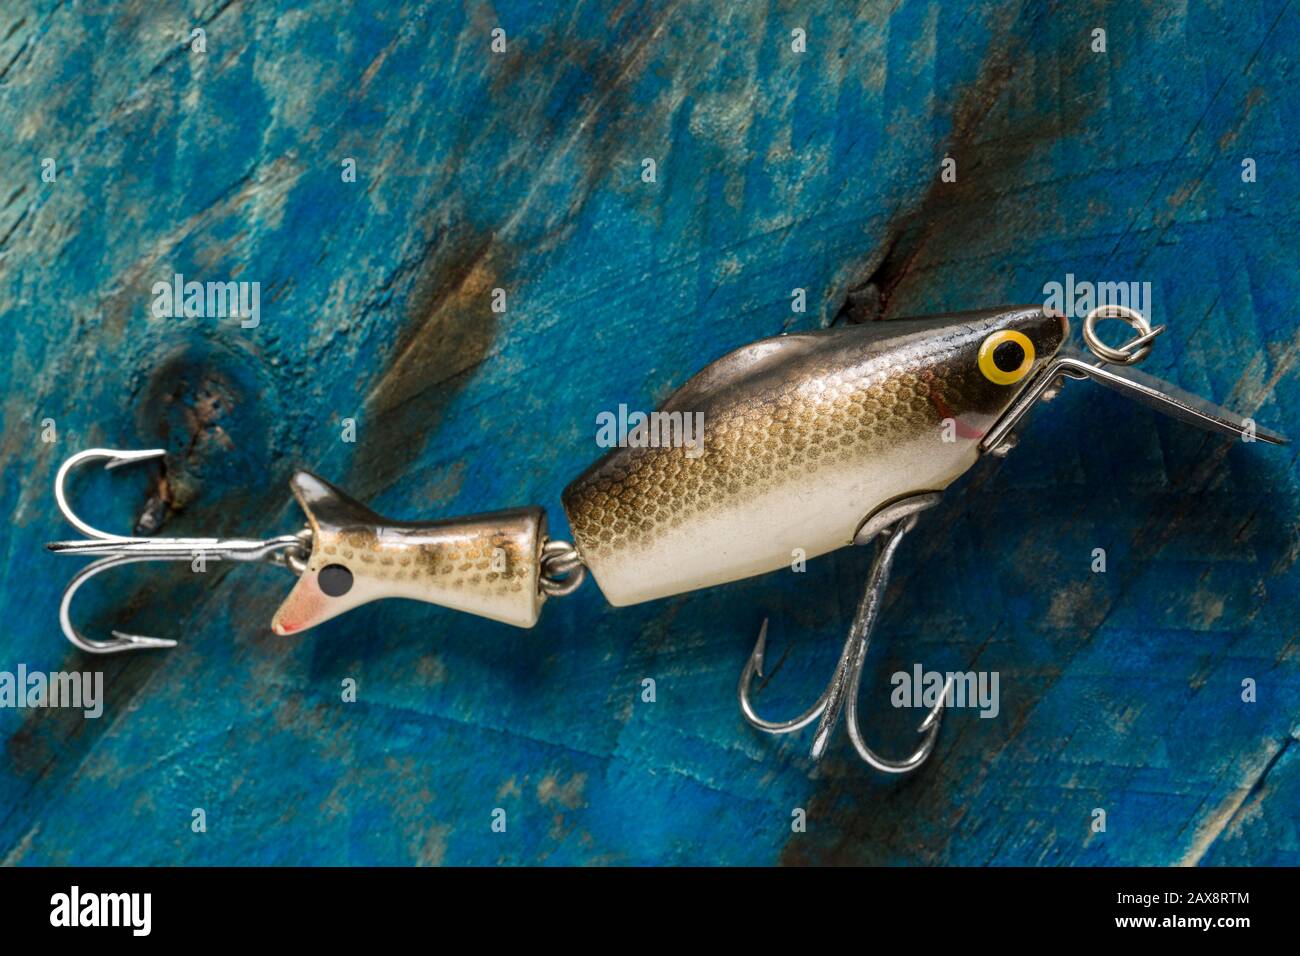 An old fishing lure, or plug, equipped with treble hooks designed to catch predatory fish. The lure has possibly been made by Woods Mfg, but this cann Stock Photo